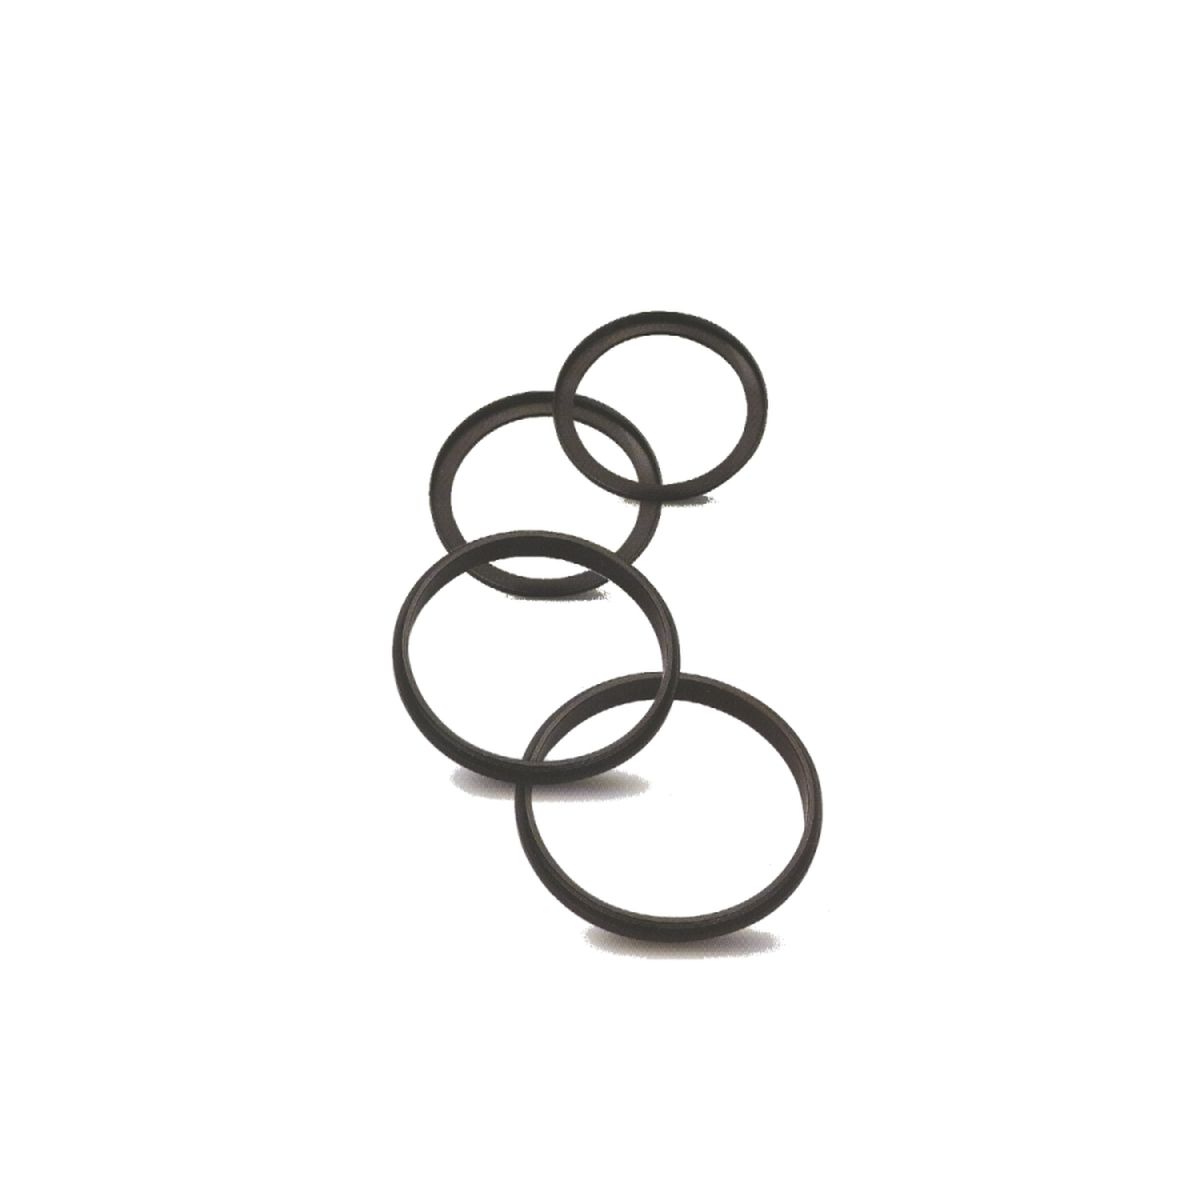 Caruba Step-up/down Ring 42mm - 39mm